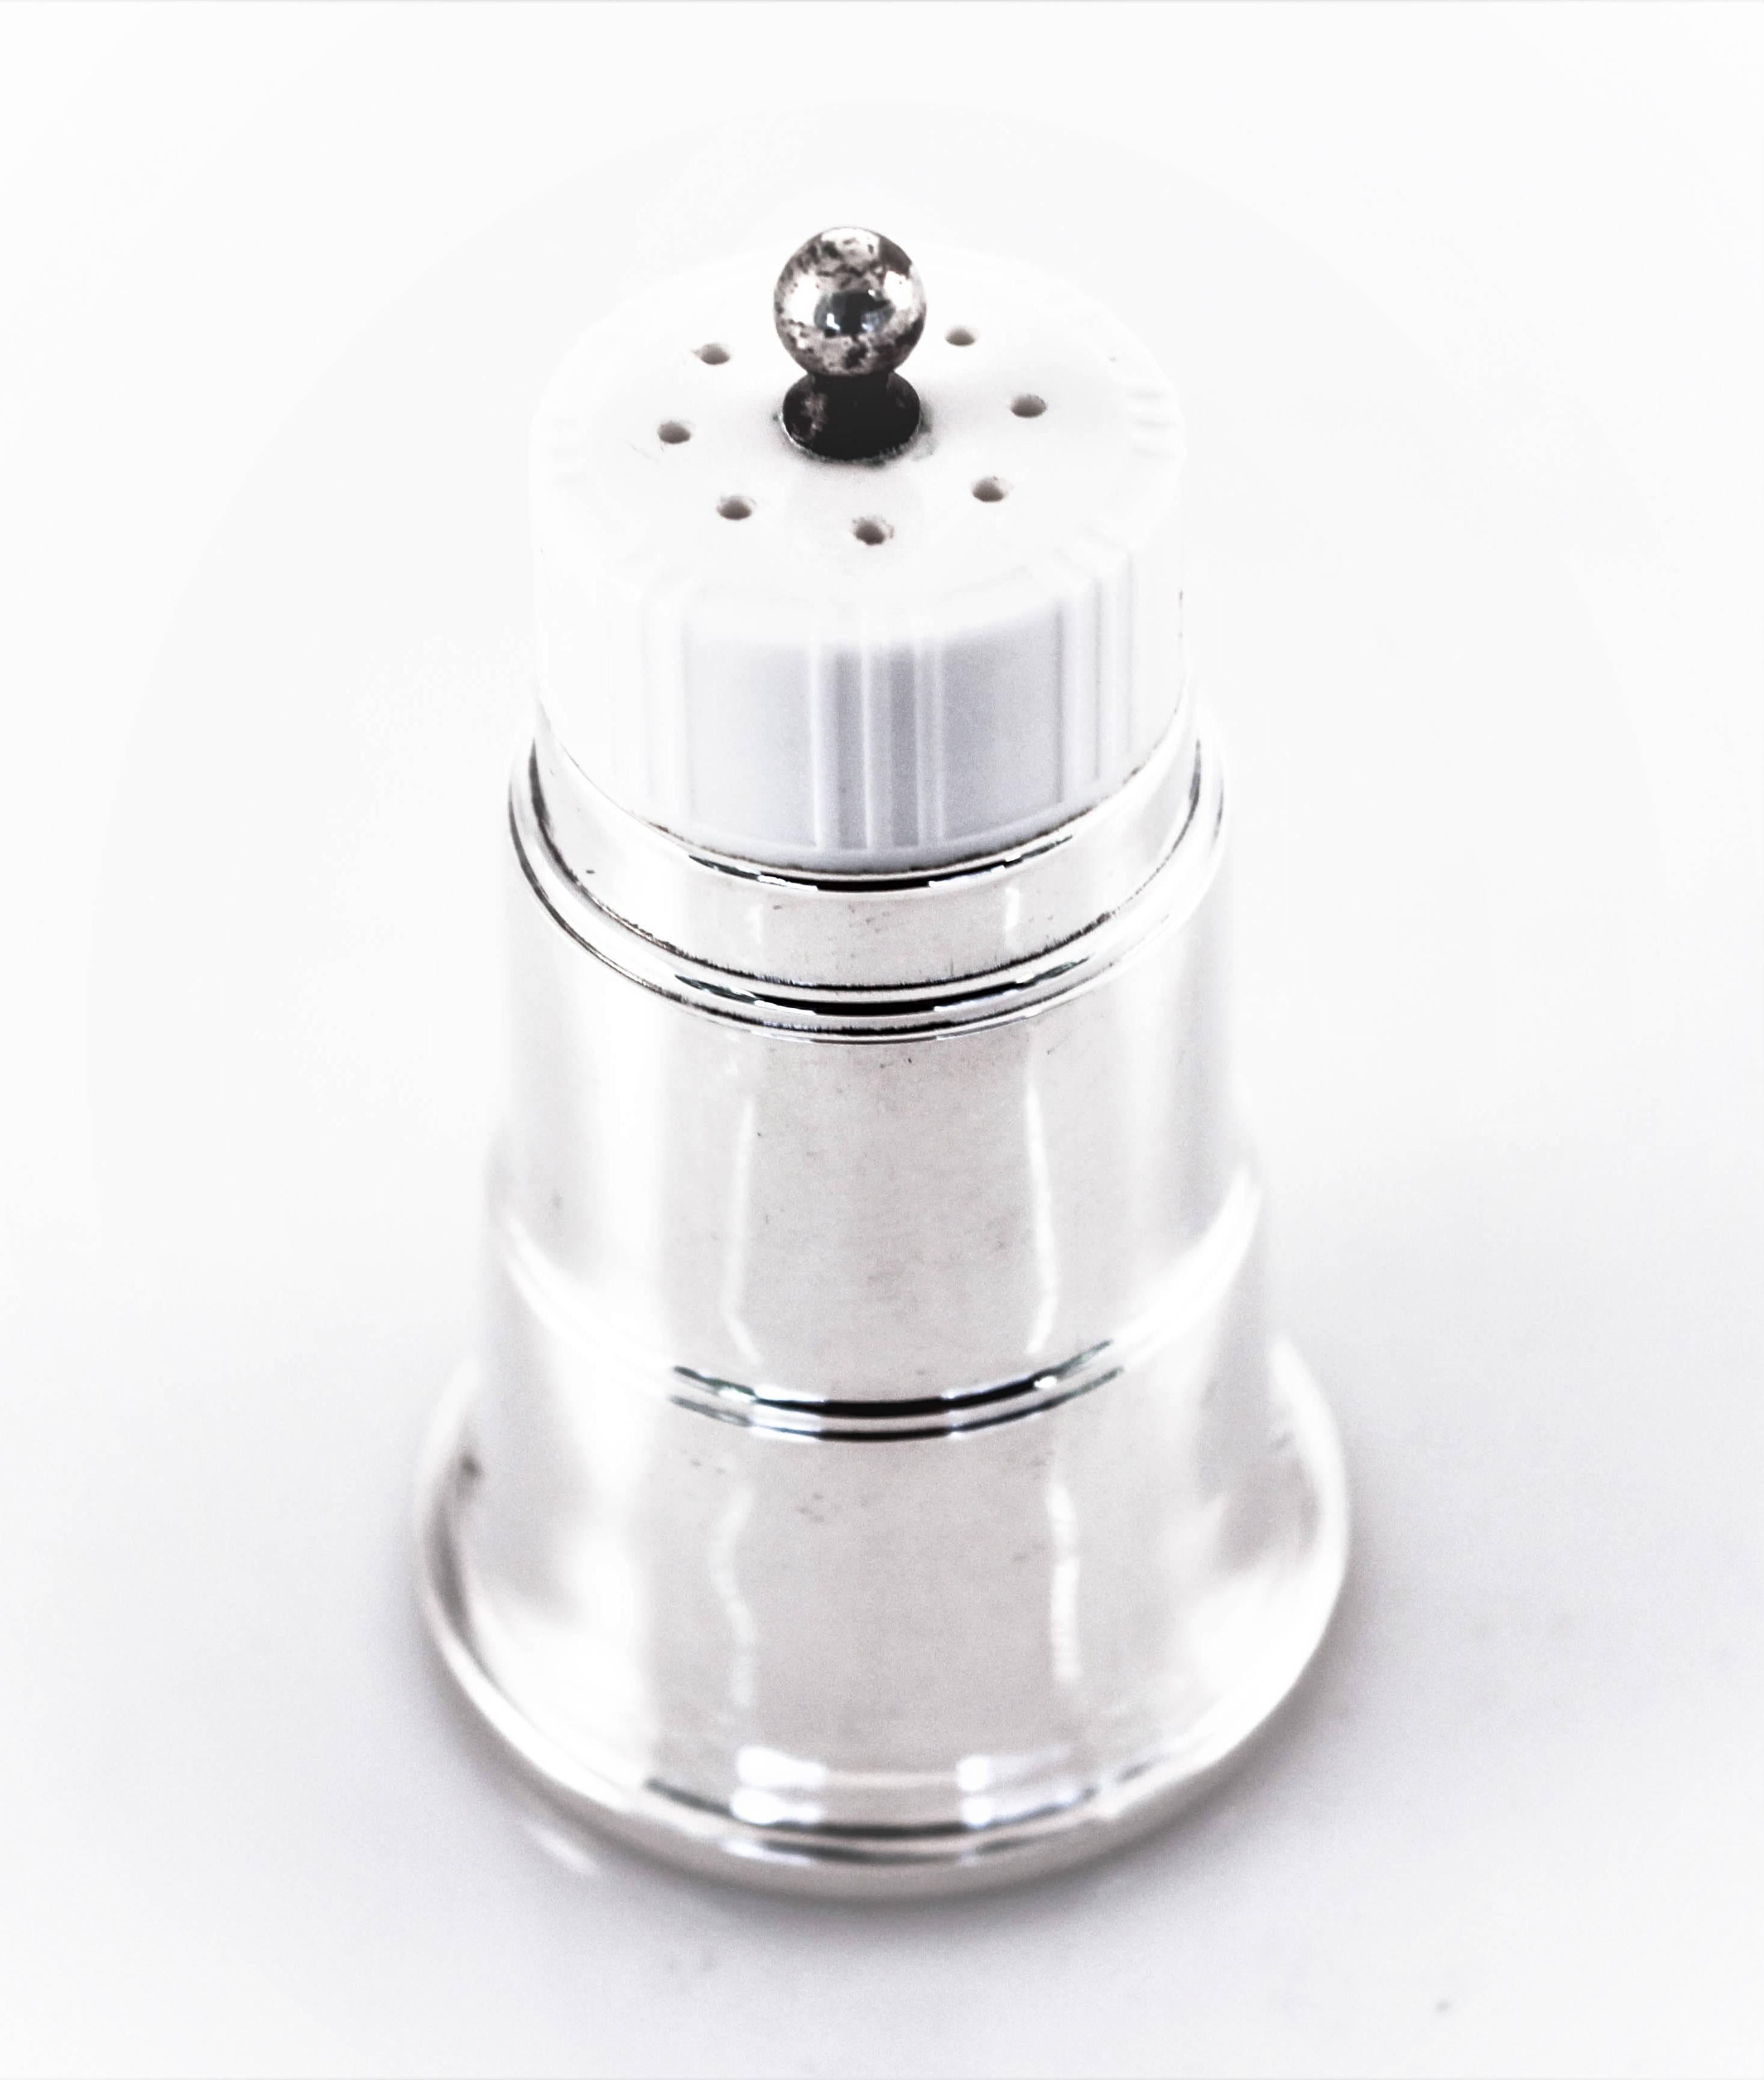 Retro is all the rage! These adorable salt and pepper shakers are quintessential mid-century in both form and style. The white top denotes salt and the black top, pepper. Glass liners allow you to keep them filled without any issues of pitting. So